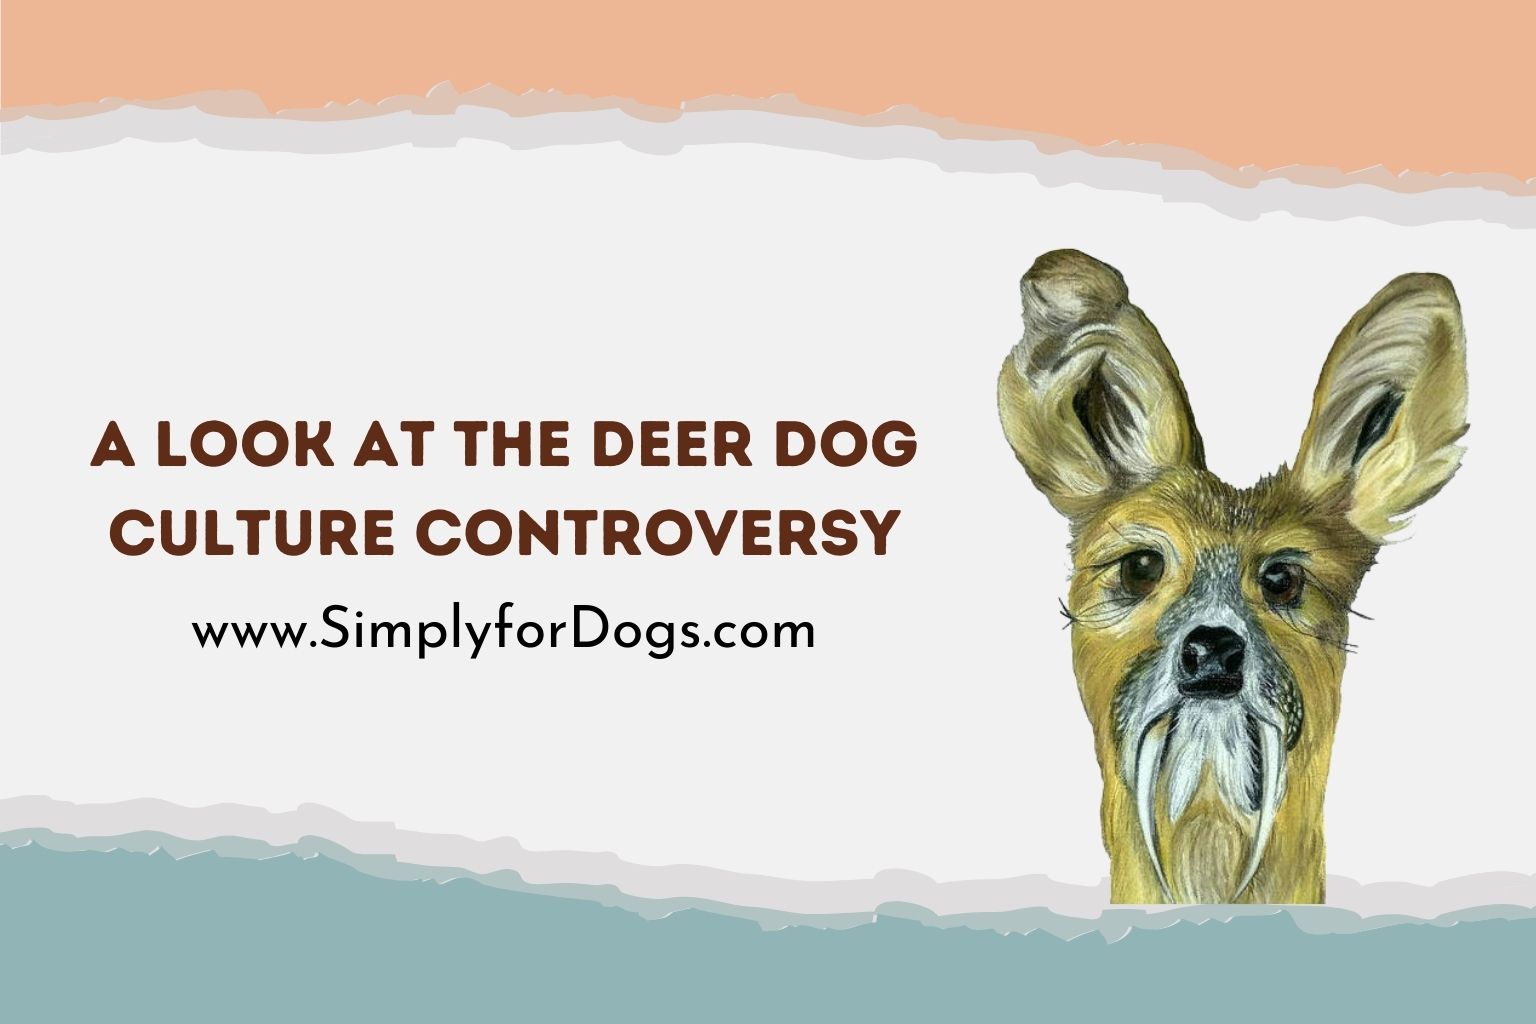 A Look at the Deer Dog Culture Controversy